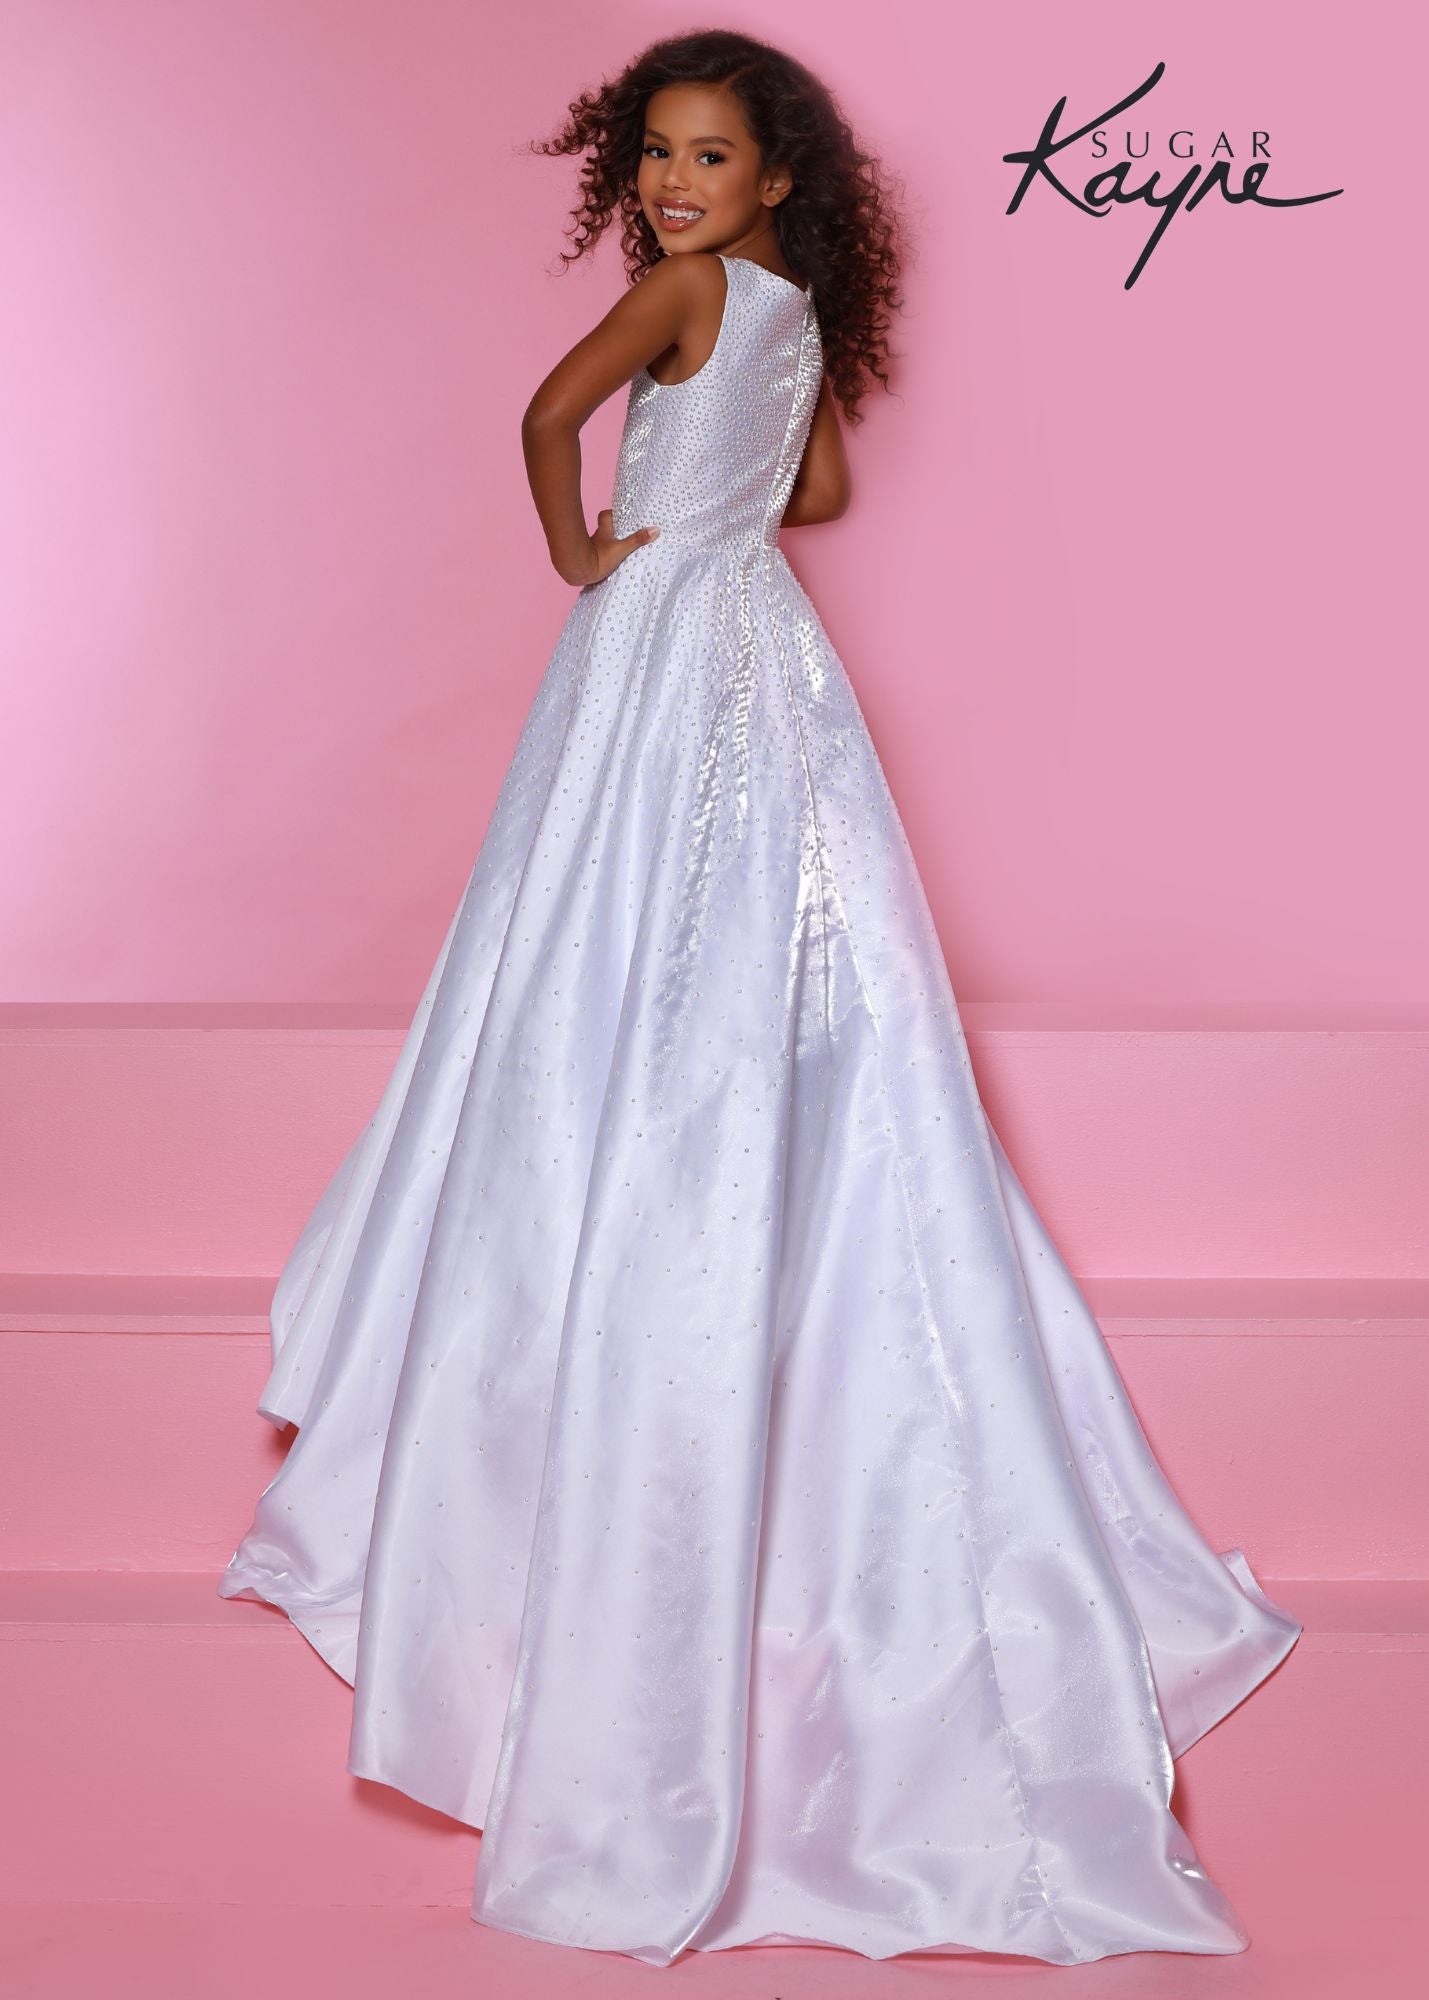 Sugar Kayne C322 Long Shimmer Satin A Line Girls Pageant Dress Embellished Gown Train Product Details Shine bright in this shimmer satin A-line gown! The bodice is fully beaded with hot-fix and gradually fades out throughout the skirt. The long train will glide beautifully across the stage.  Colors: Aqua, Royal, Red, White  Sizes: 2, 4, 6, 8, 10, 12, 14, 16  Fabric Shimmer Satin, Satin Lining